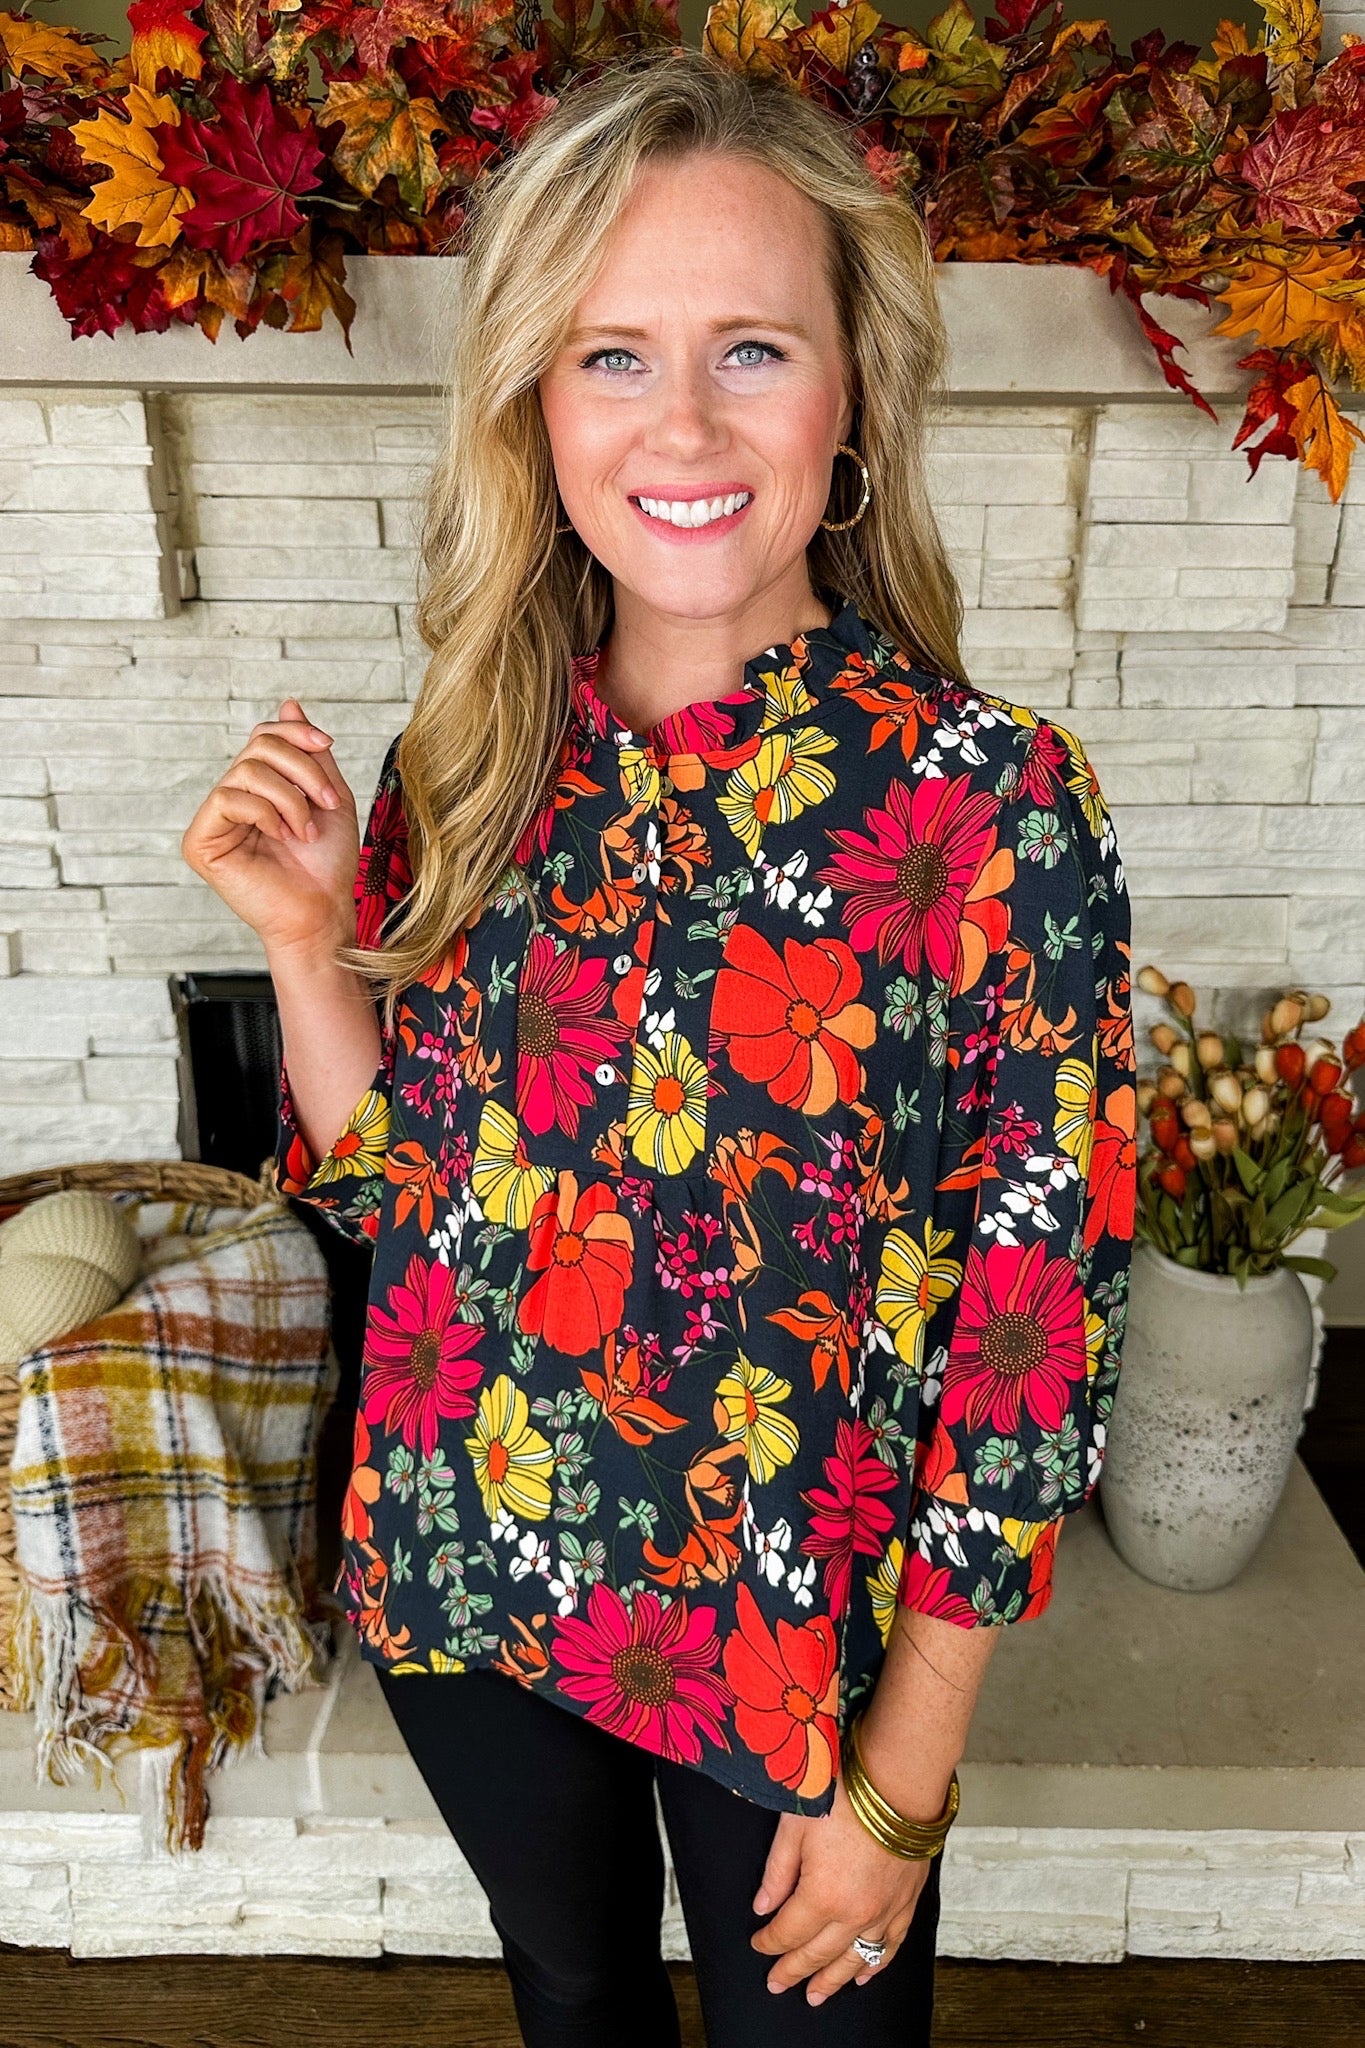 The Roxy Vintage Petals Ash Top by Michelle McDowell